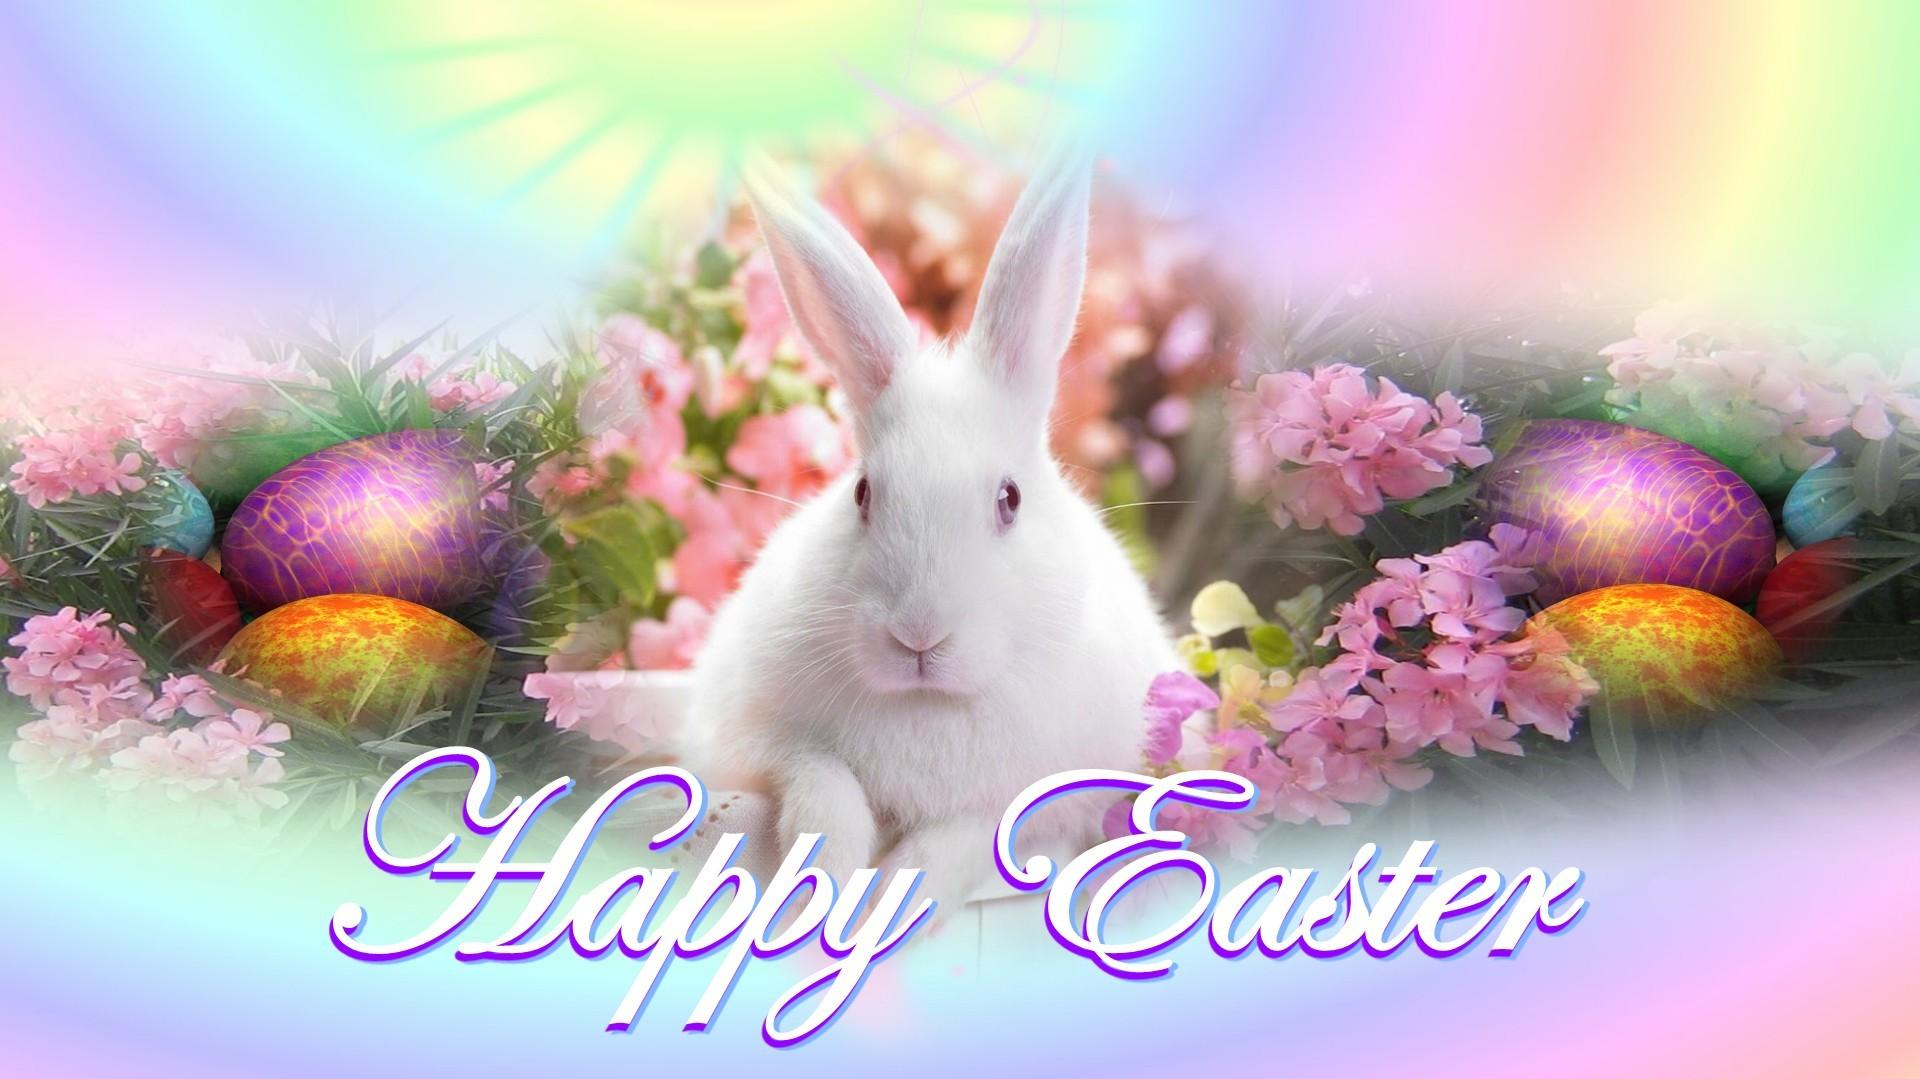 Free download Happy Easter Bunny 2013 For Desktop [1920x1080] for